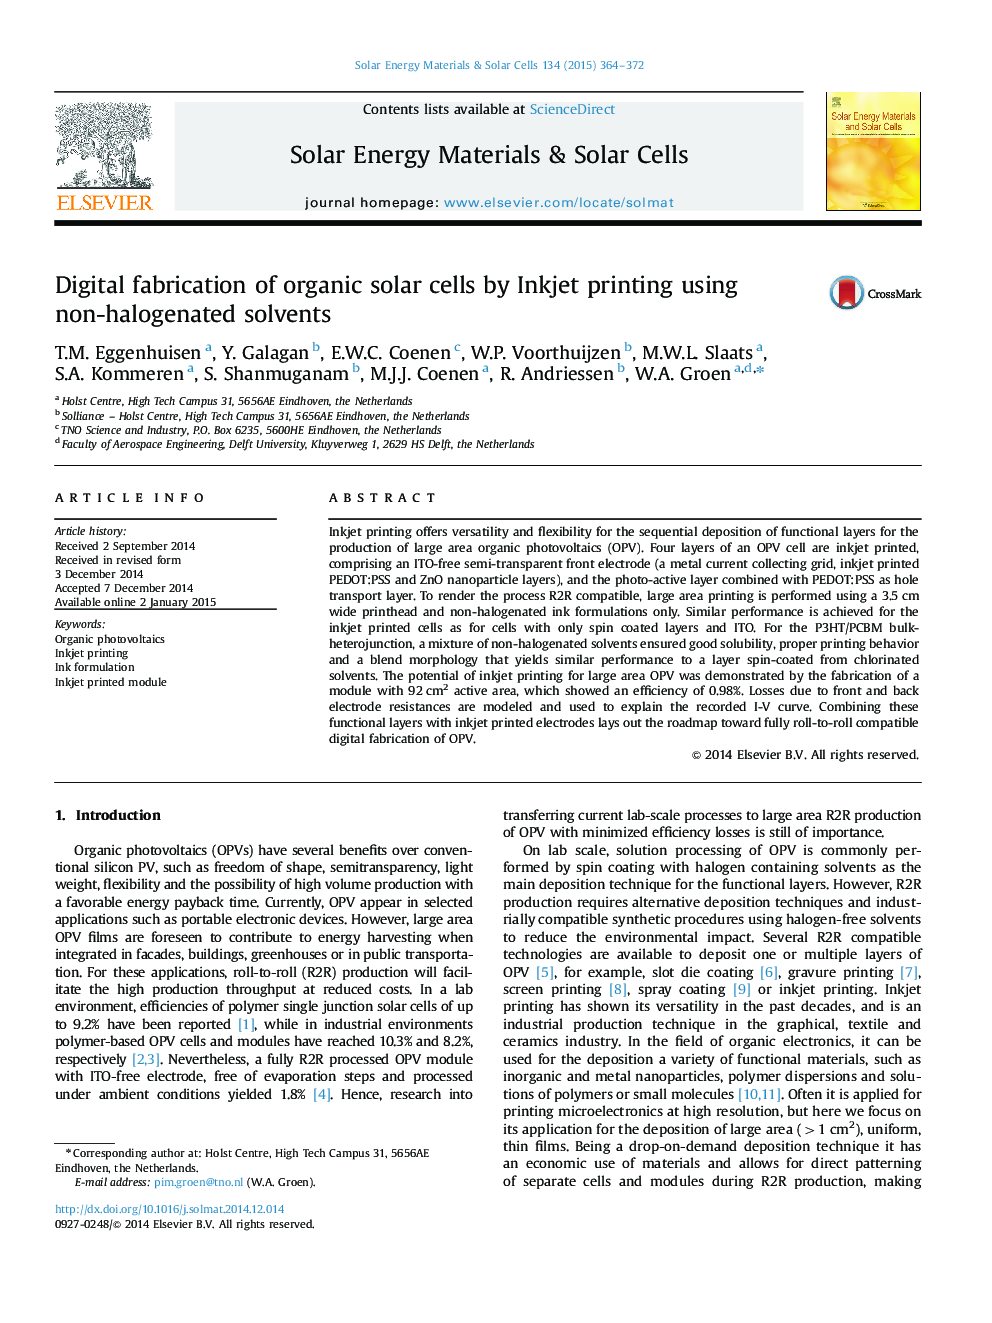 Digital fabrication of organic solar cells by Inkjet printing using non-halogenated solvents